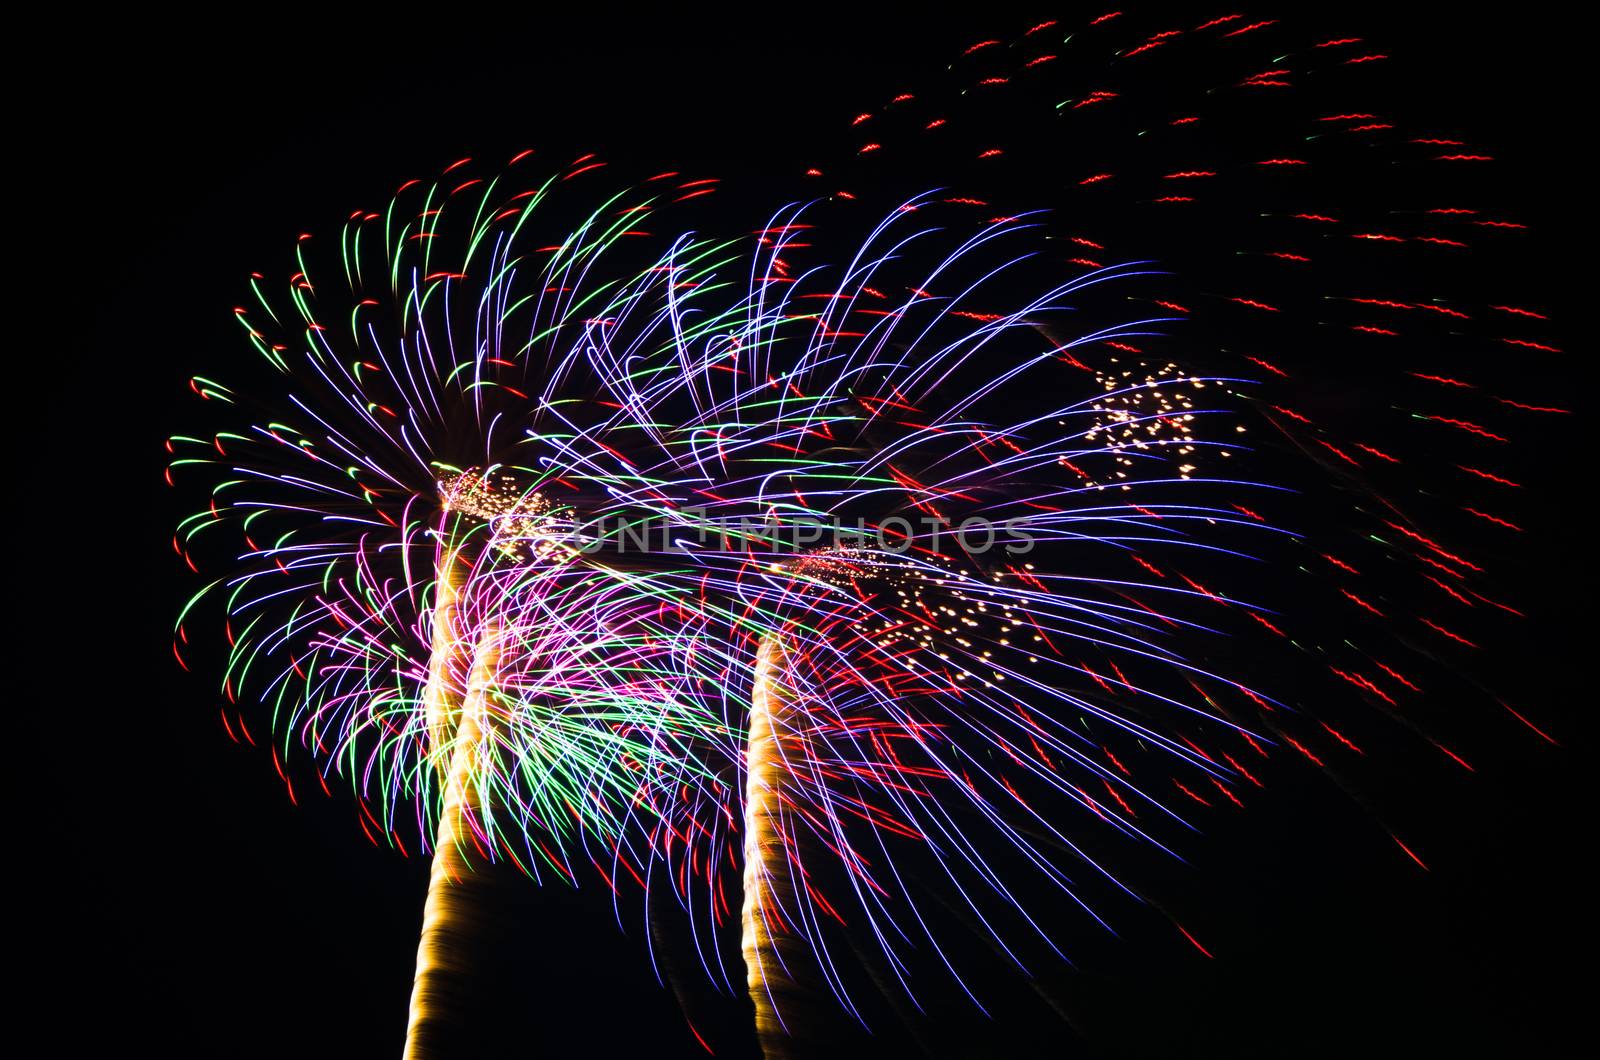 An image of exploding fireworks at night by nop16